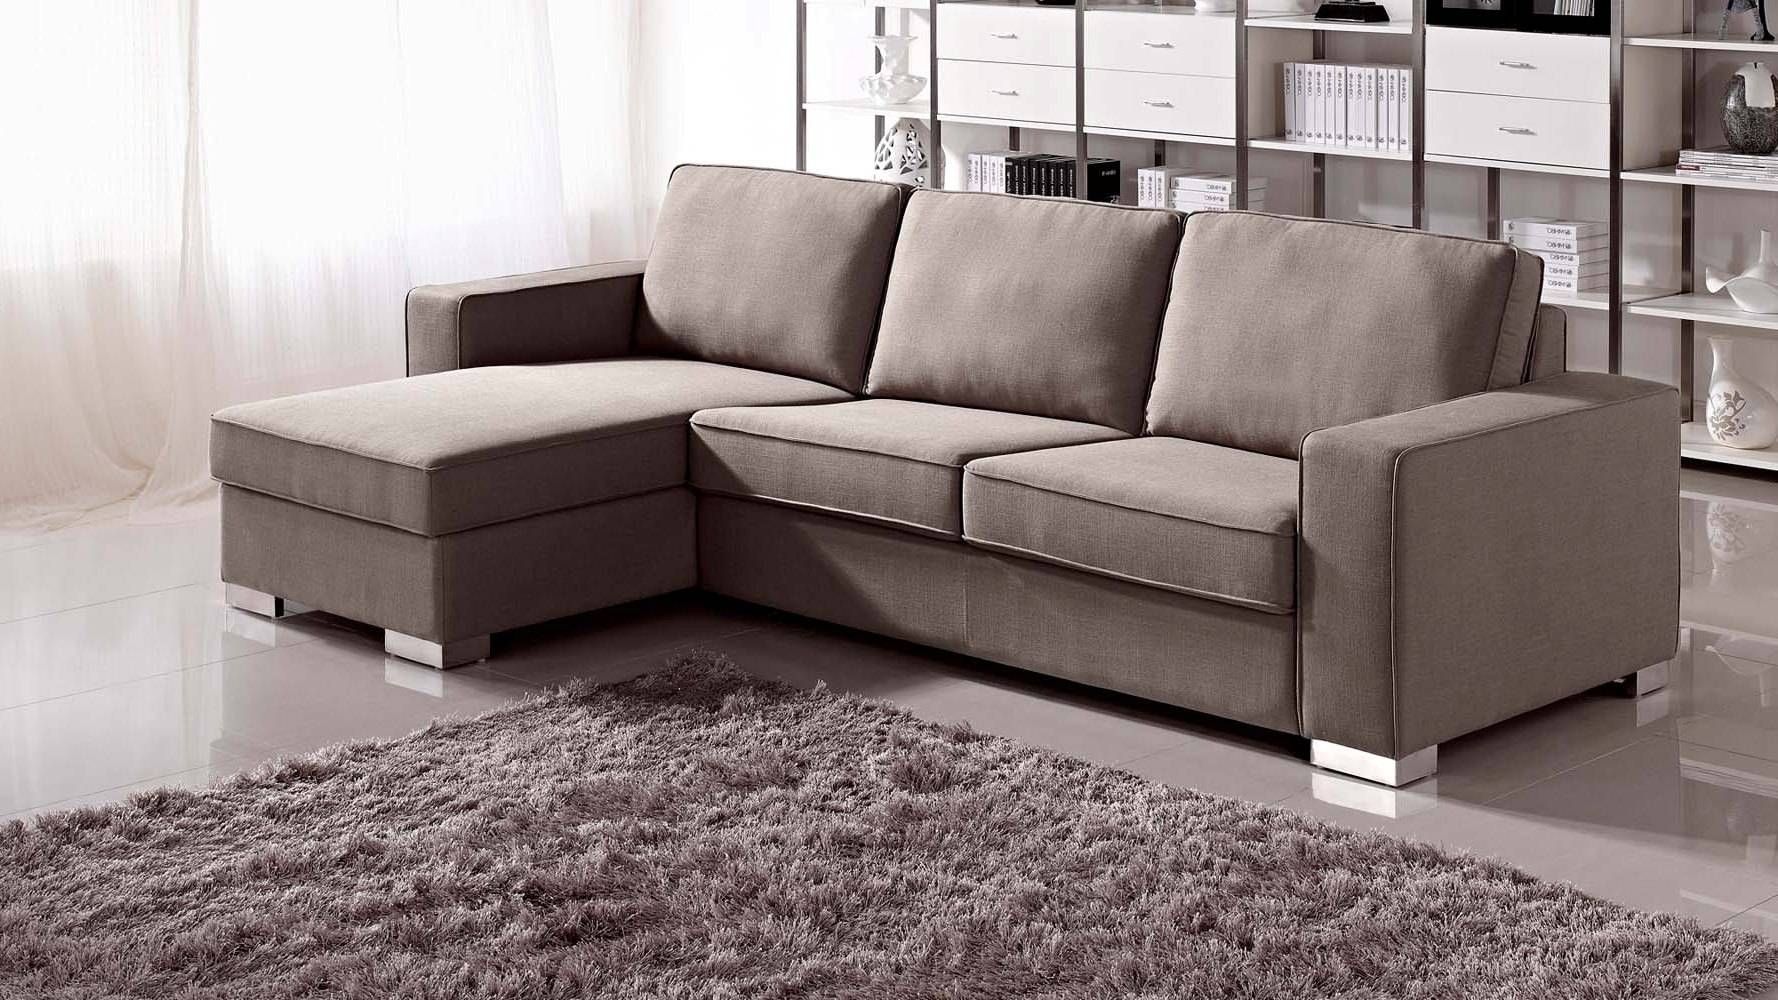 Amusing Sleeper Sectional Sofas With Chaise 31 In Puzzle Sectional With Puzzle Sectional Sofas (View 5 of 15)